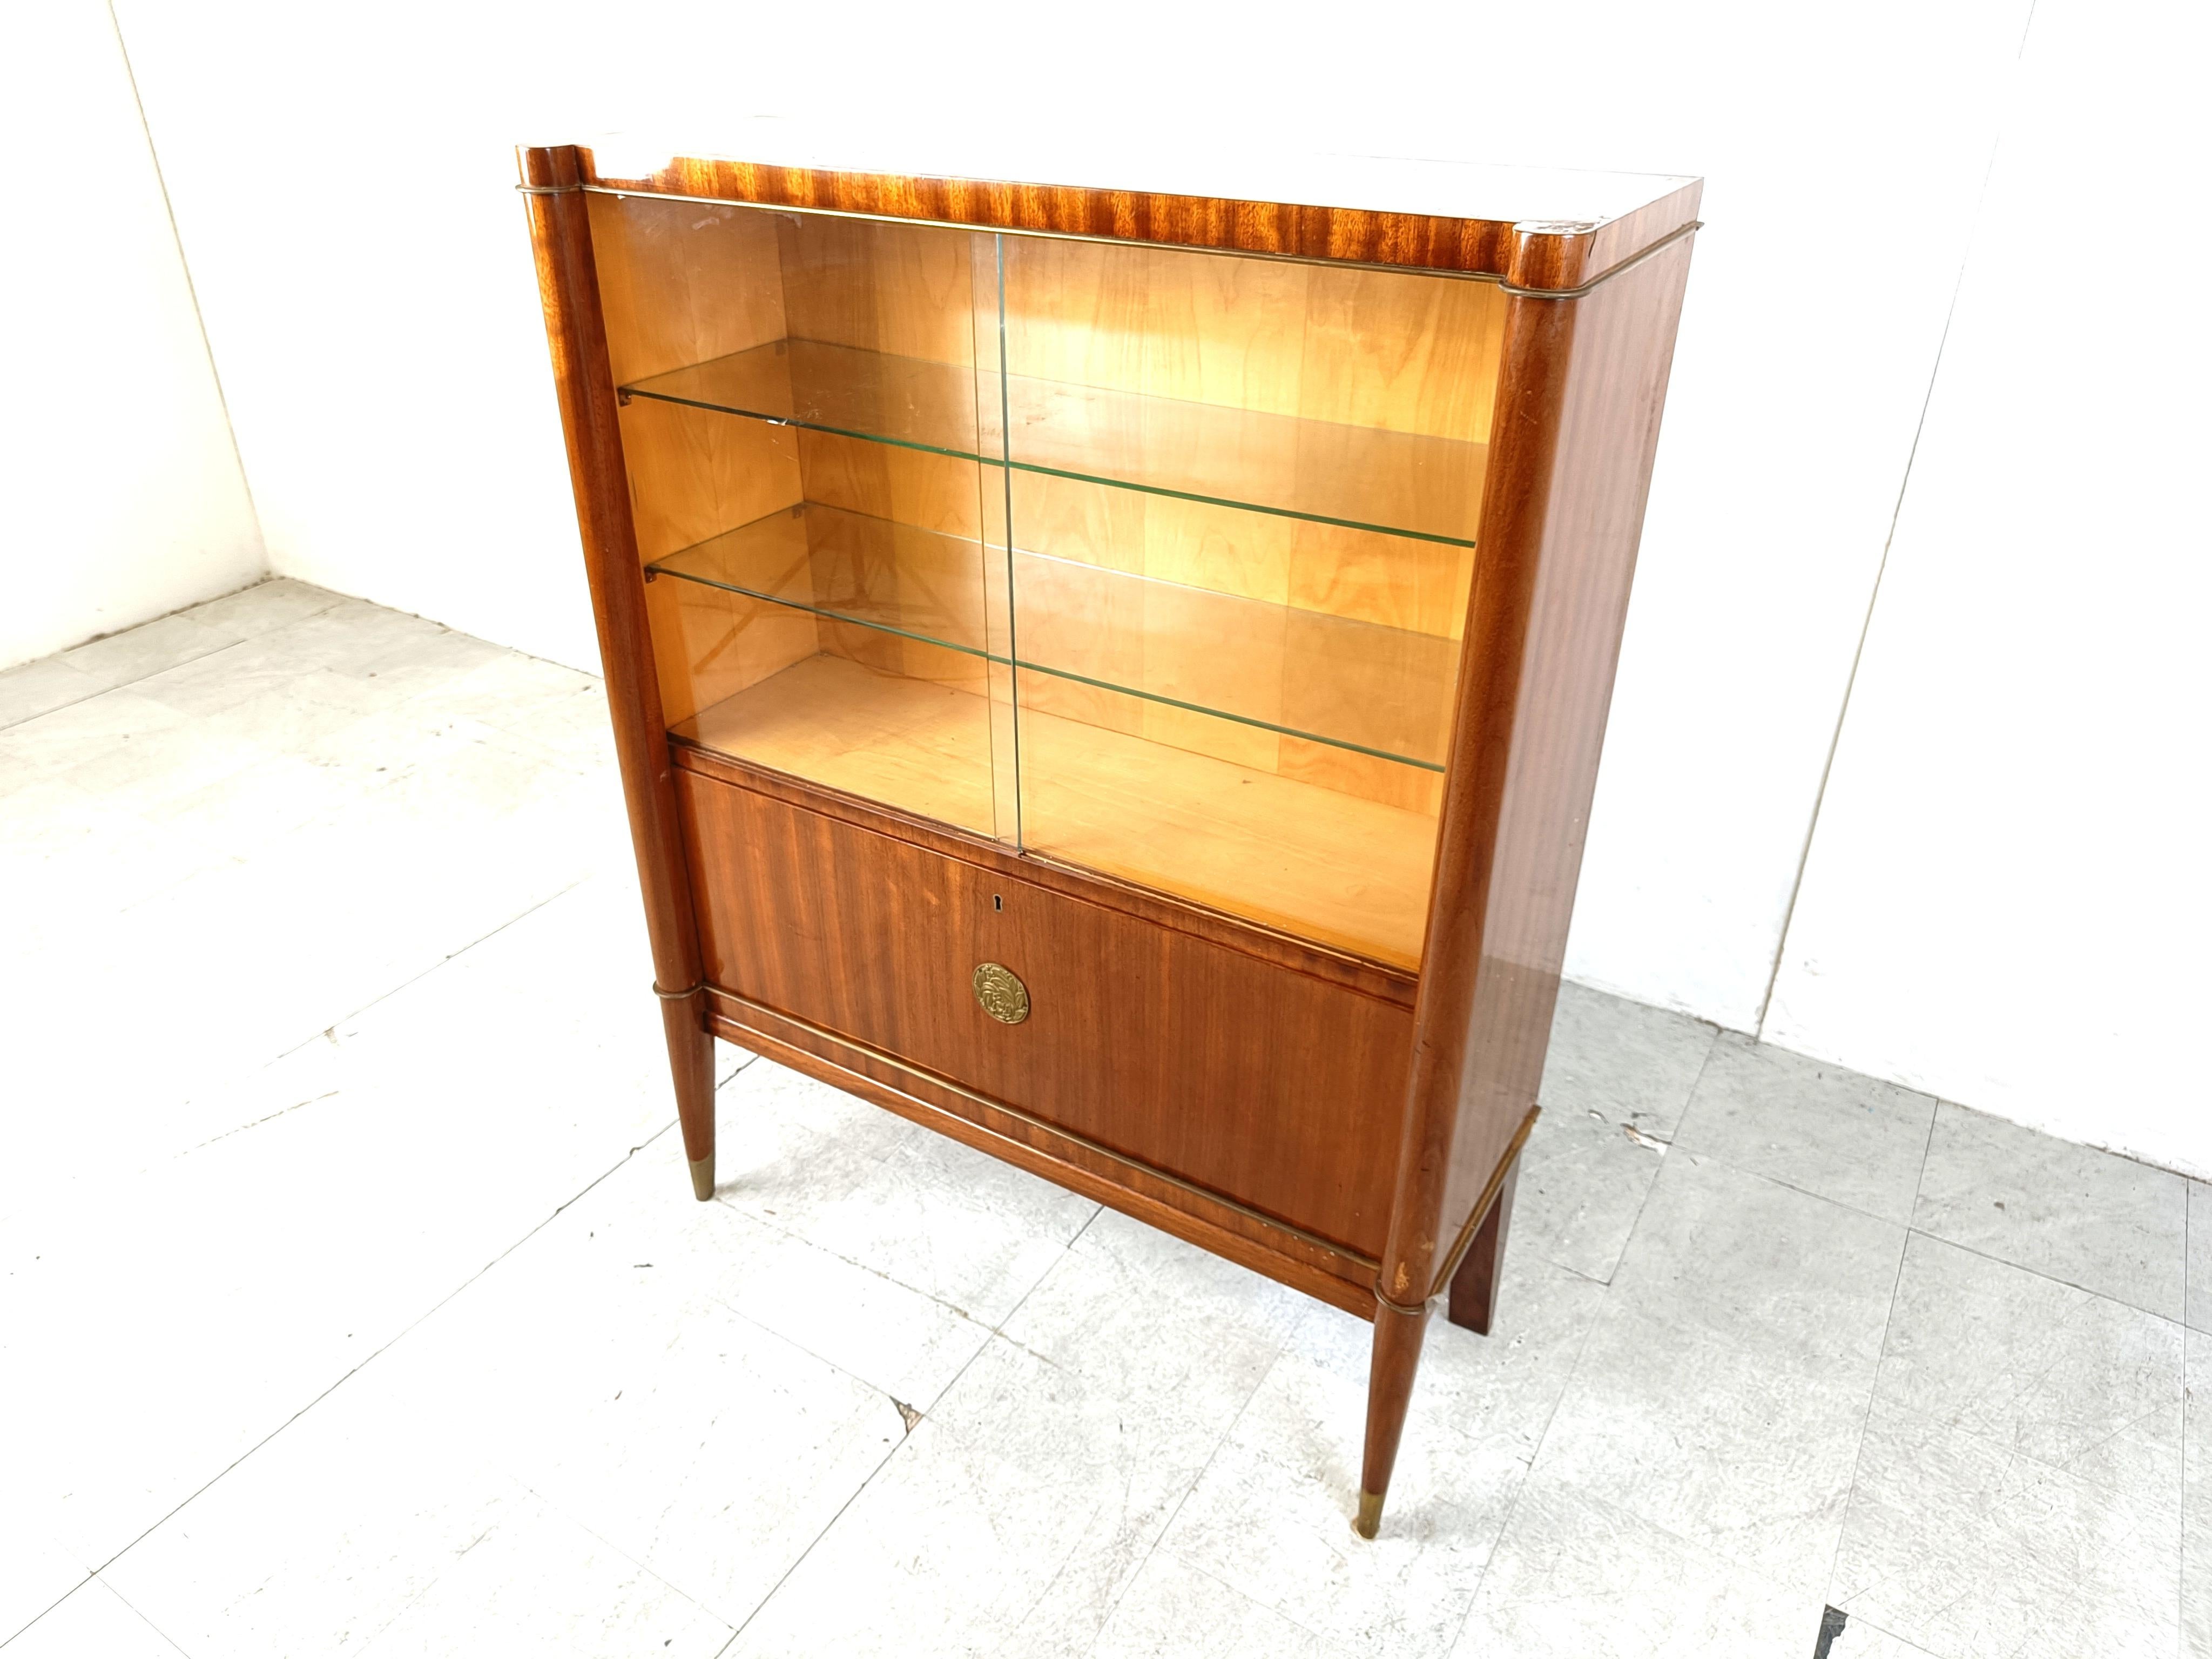 Gorgeous curved art deco cabinet model 'Voltaire' by Decoene Frères in Mahogany, bronze and brass.

Very high quality piece of furniture with an art deco elegance which will contrast beautifully with modern day interiors.

Very good condition.

If